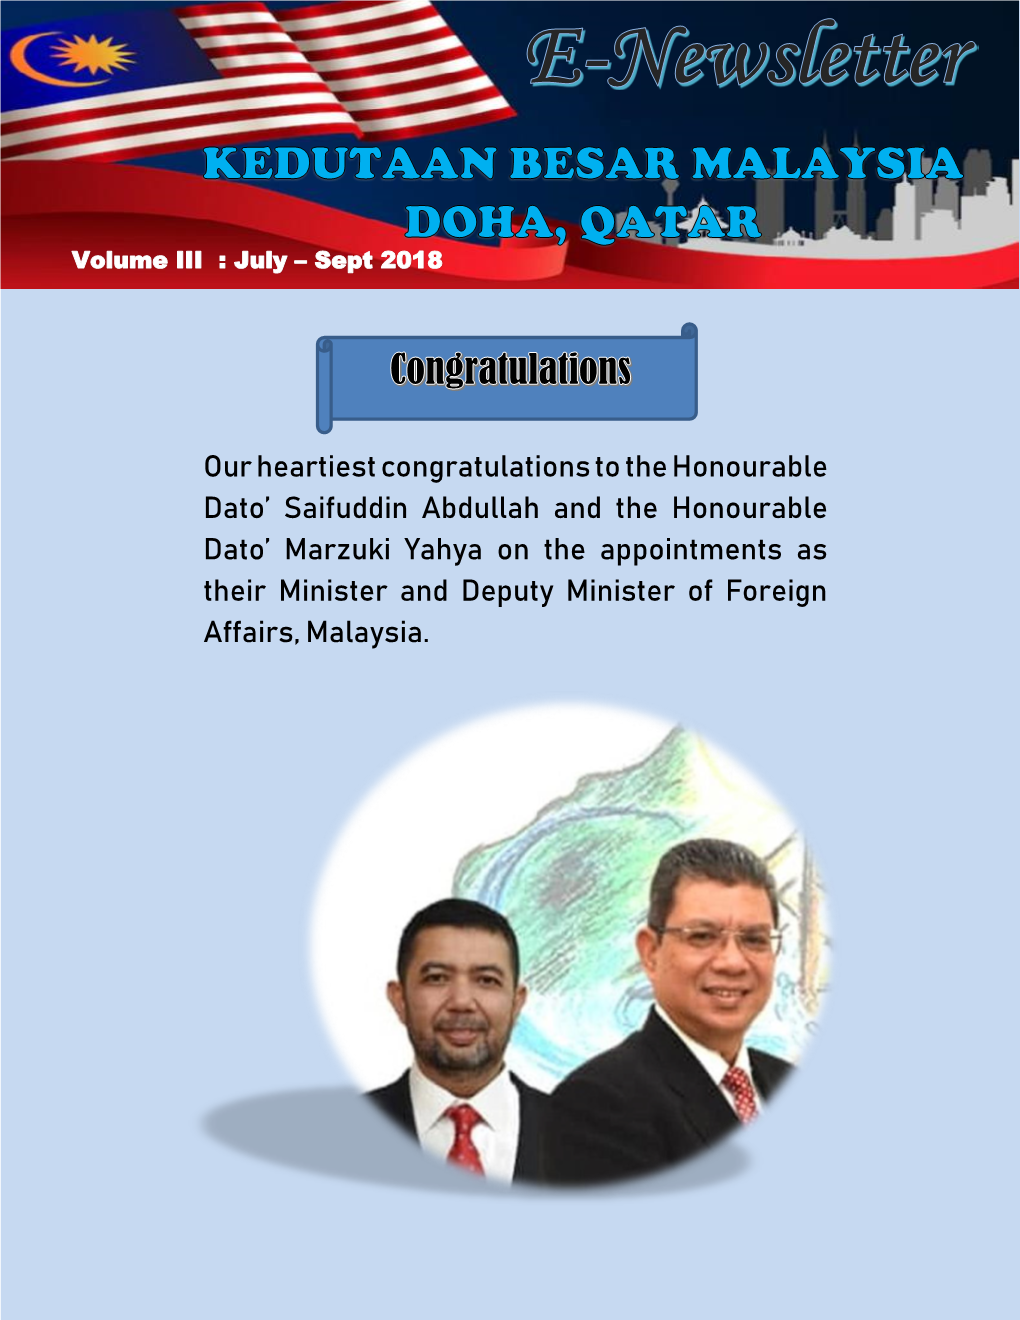 Our Heartiest Congratulations to the Honourable Dato' Saifuddin